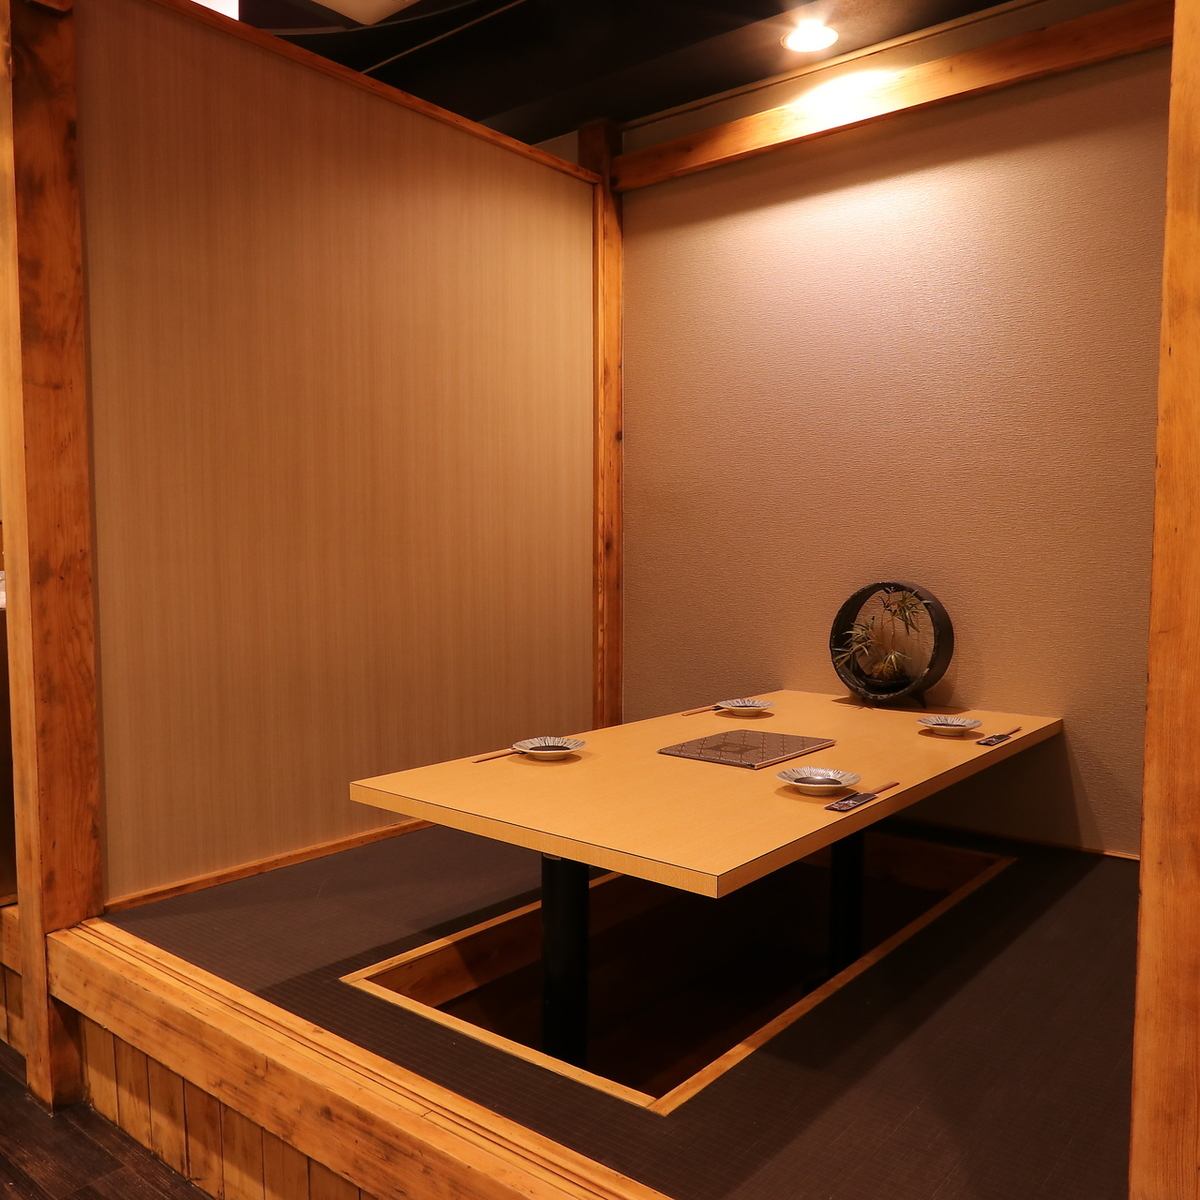 The interior of the store has a calm atmosphere with sunken kotatsu seating.